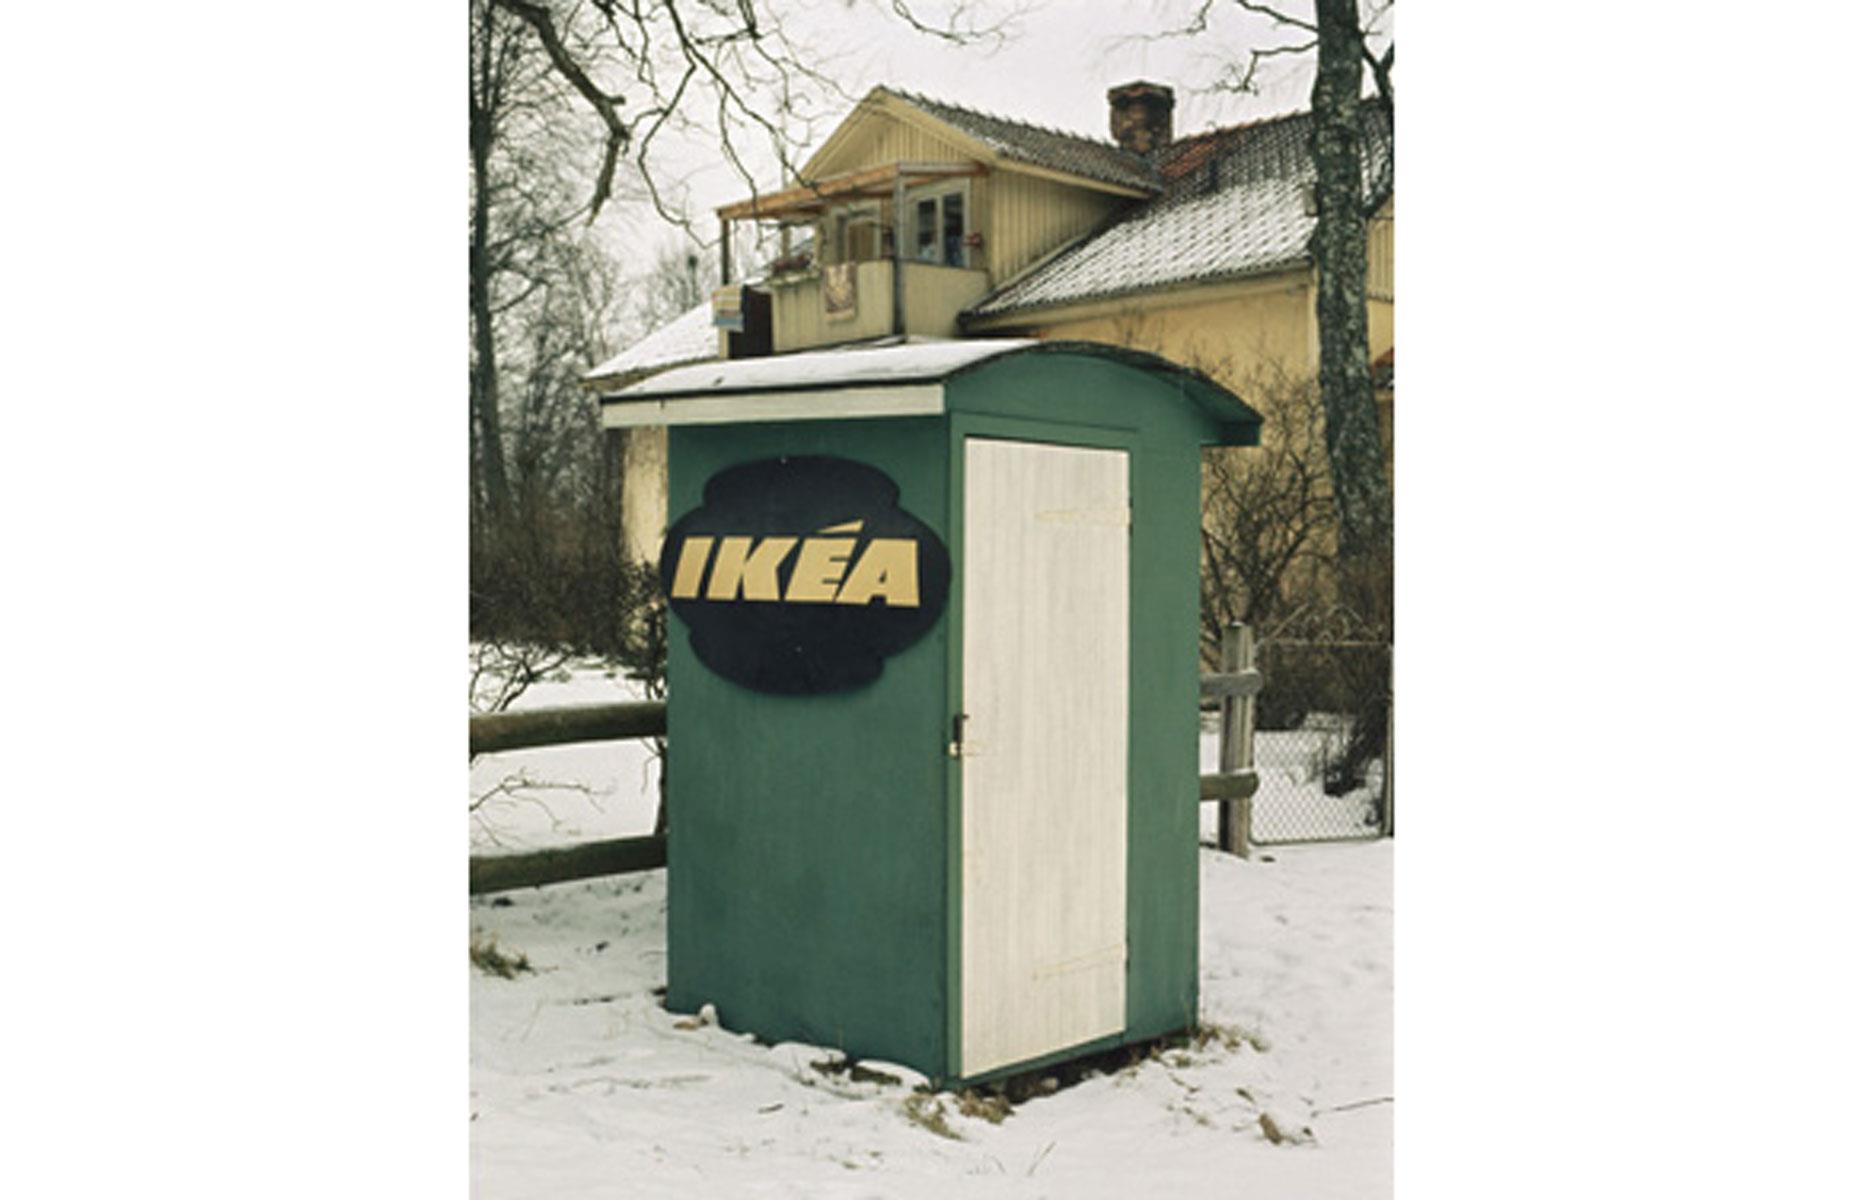 IKEA founded